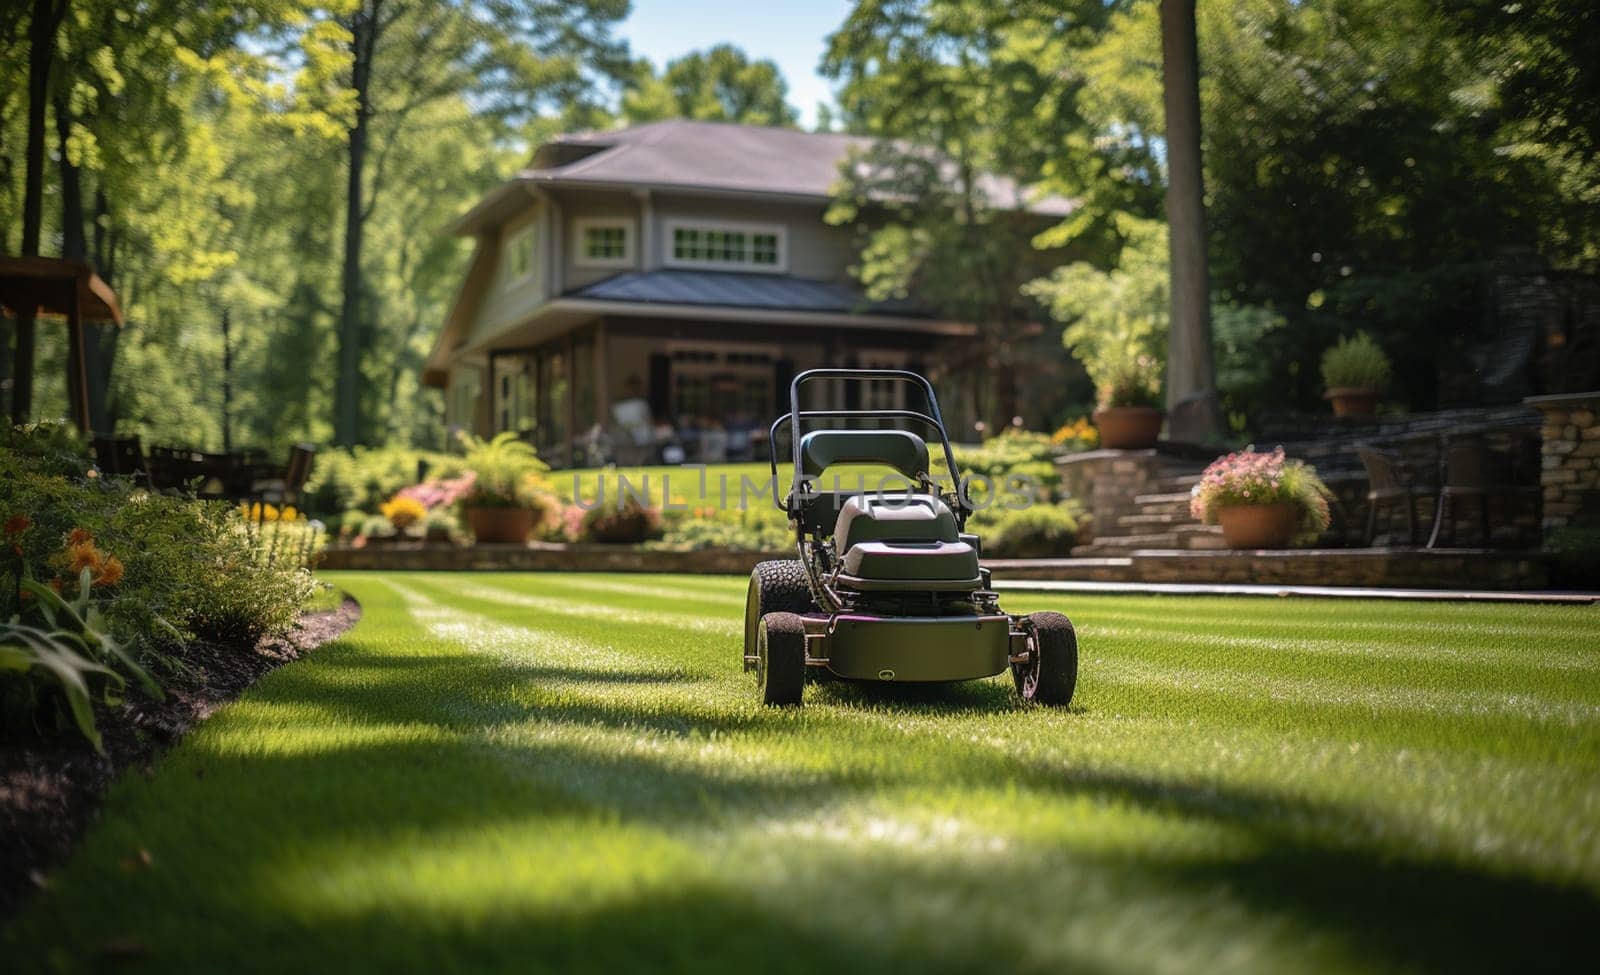 A lawn mower on a lush green lawn surrounded by flowers. The back yard of the house. by Andelov13